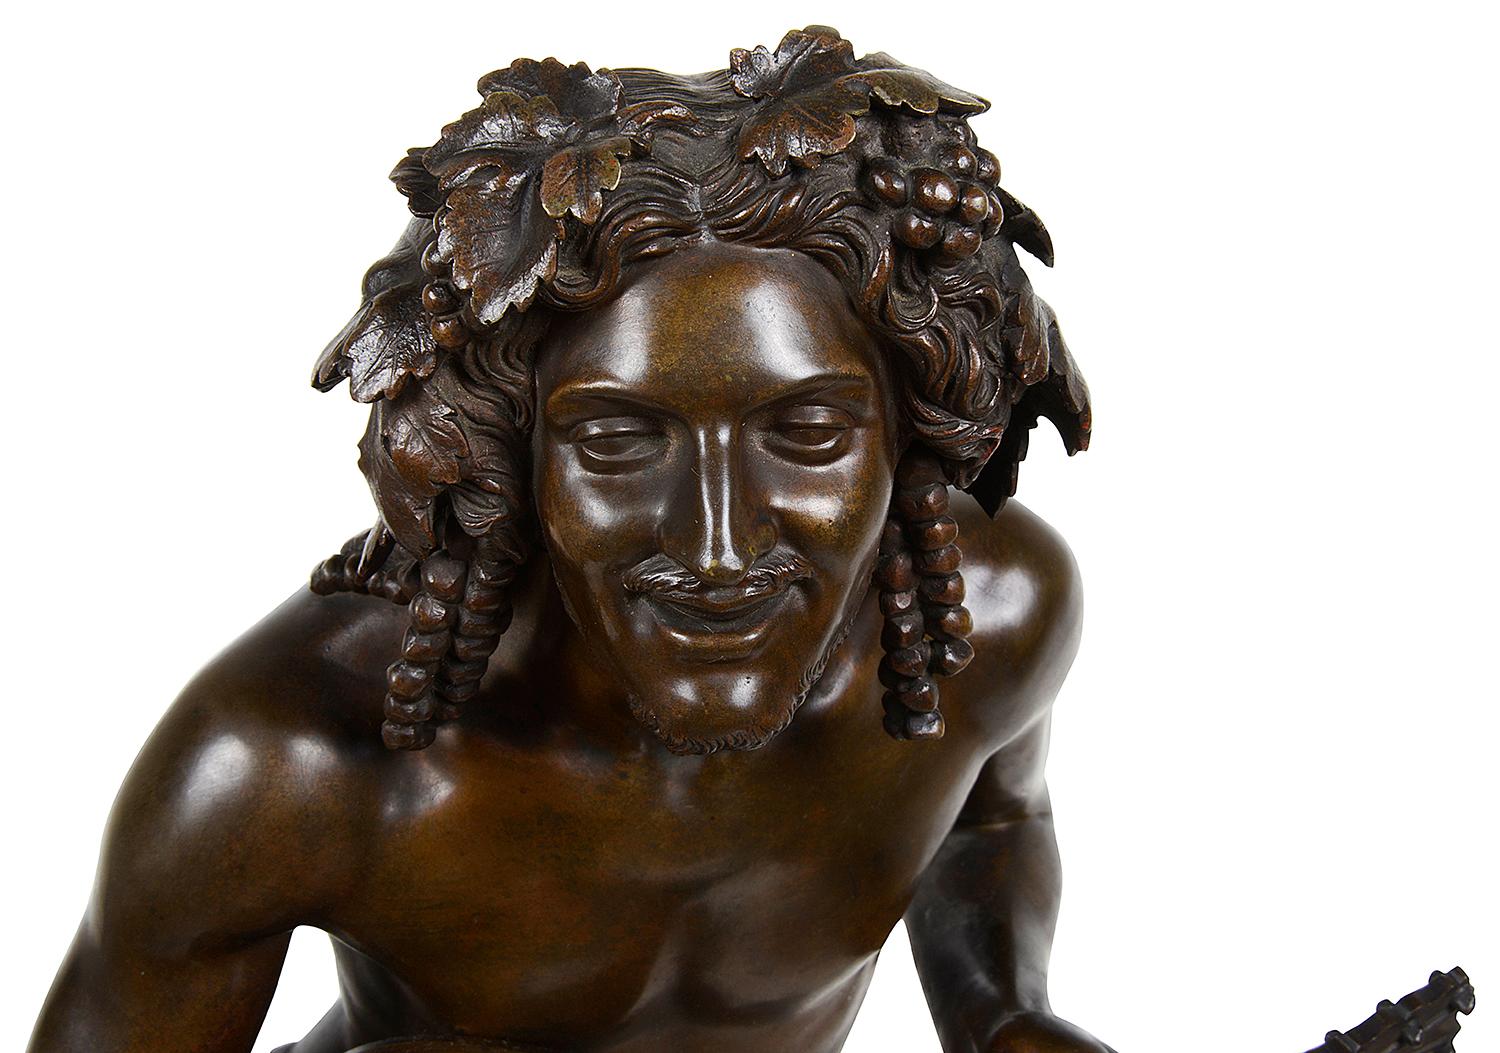 A fine & large 19th century bronze study of Bacchus resting on a bountiful barrel of grapes holding a lute with grape & vine in his hair, an unkempt beard with crossed leg and an outstretched finger. This splendid bronze has a wonderfully rich